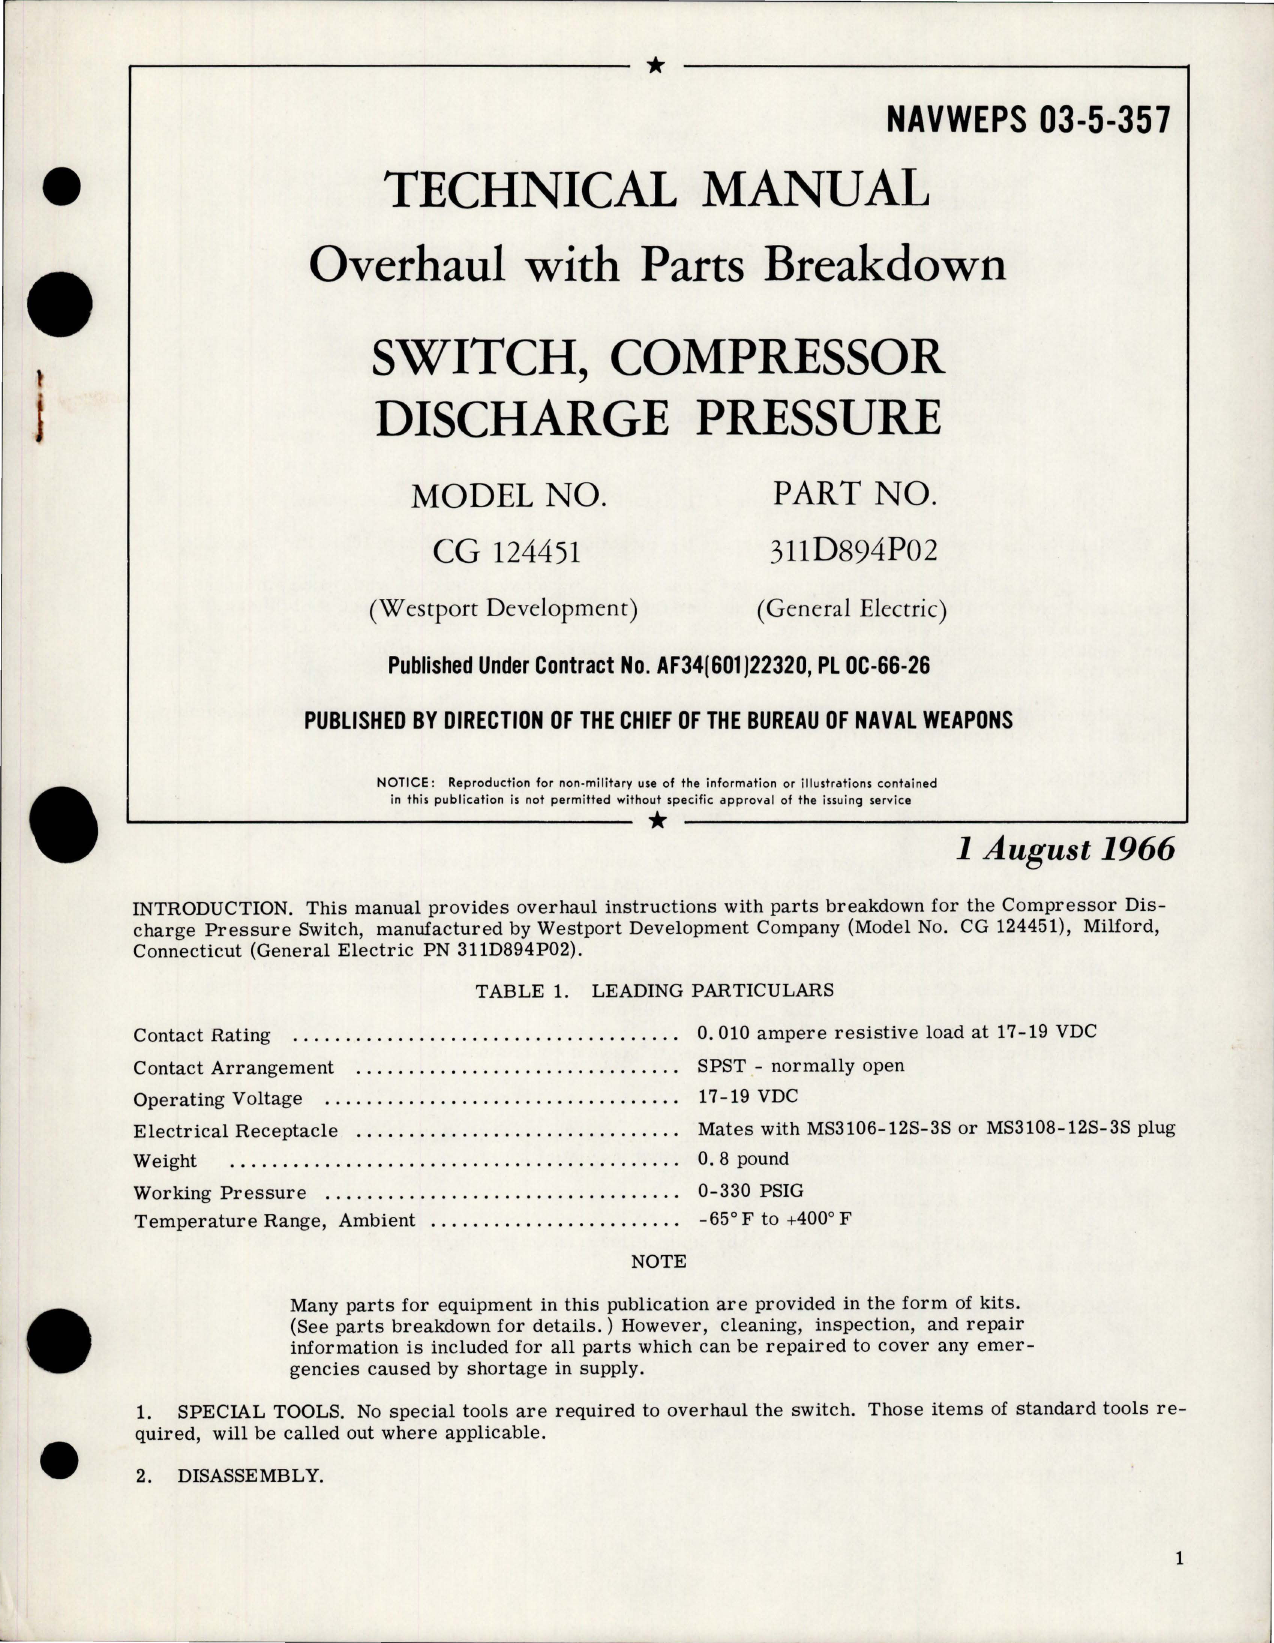 Sample page 1 from AirCorps Library document: Overhaul with Parts Breakdown for Compressor Discharge Pressure Switch - Westport Model CG 124451 - GE Part 311D894P02 